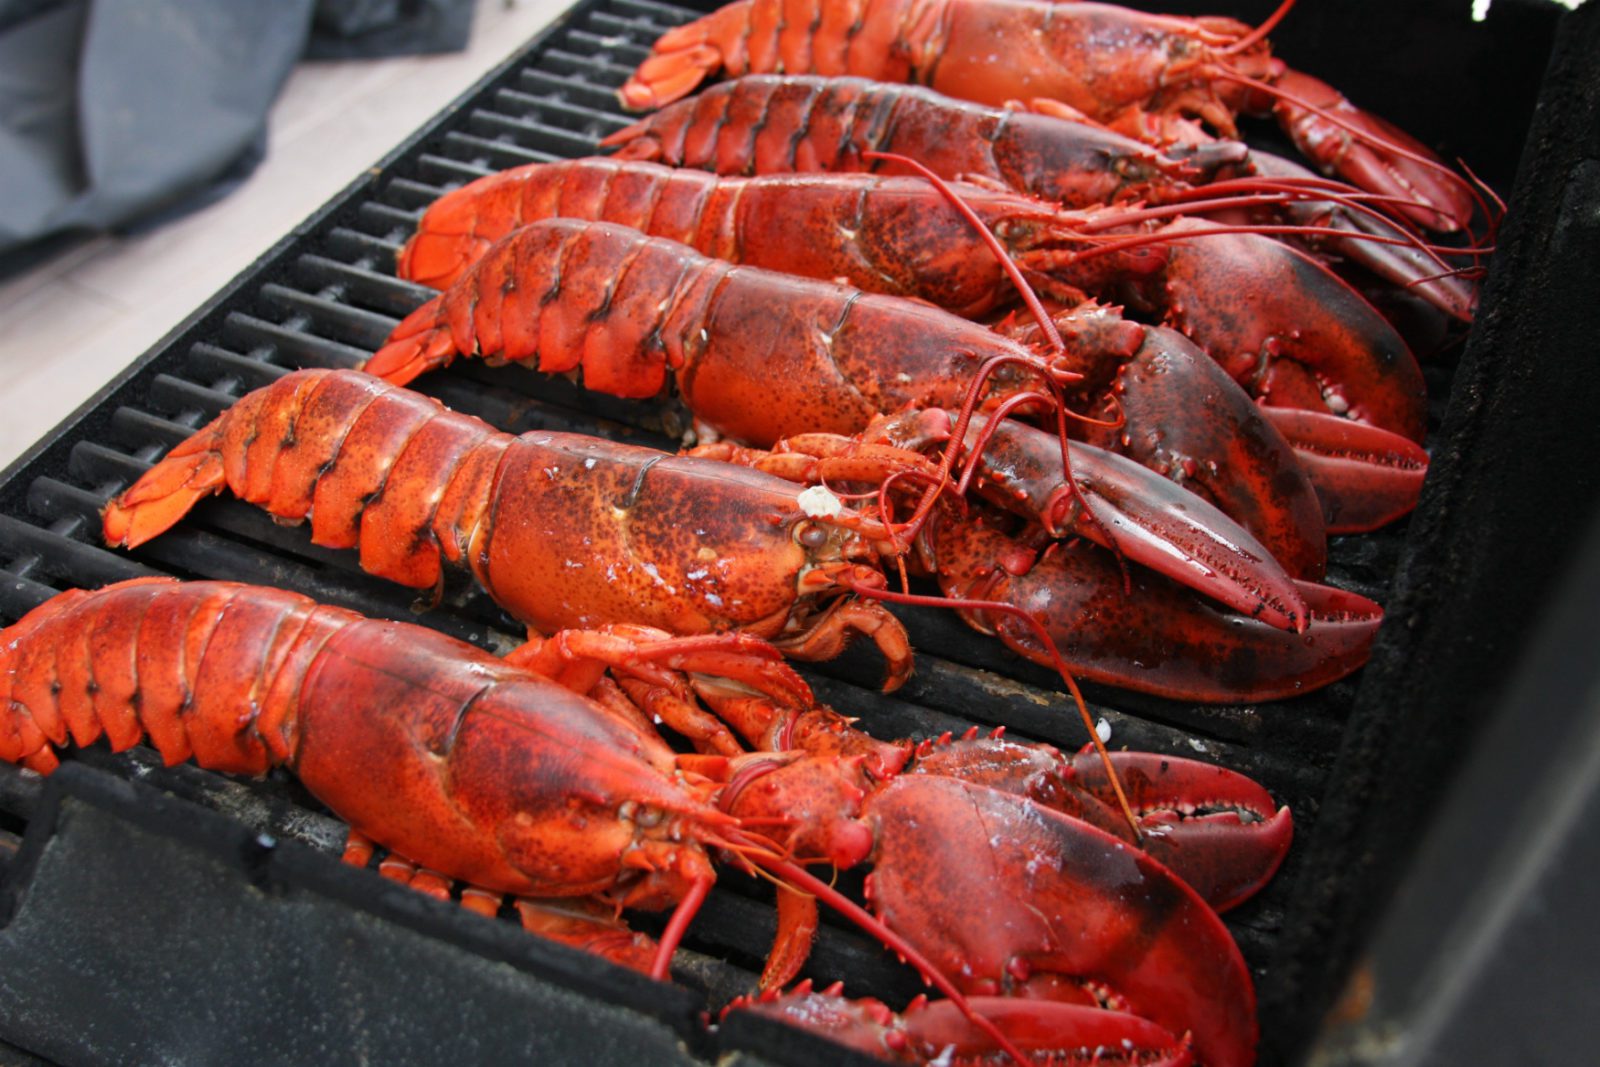 How to eat lobster, a guide to ordering in a restaurant - Scotsman Food